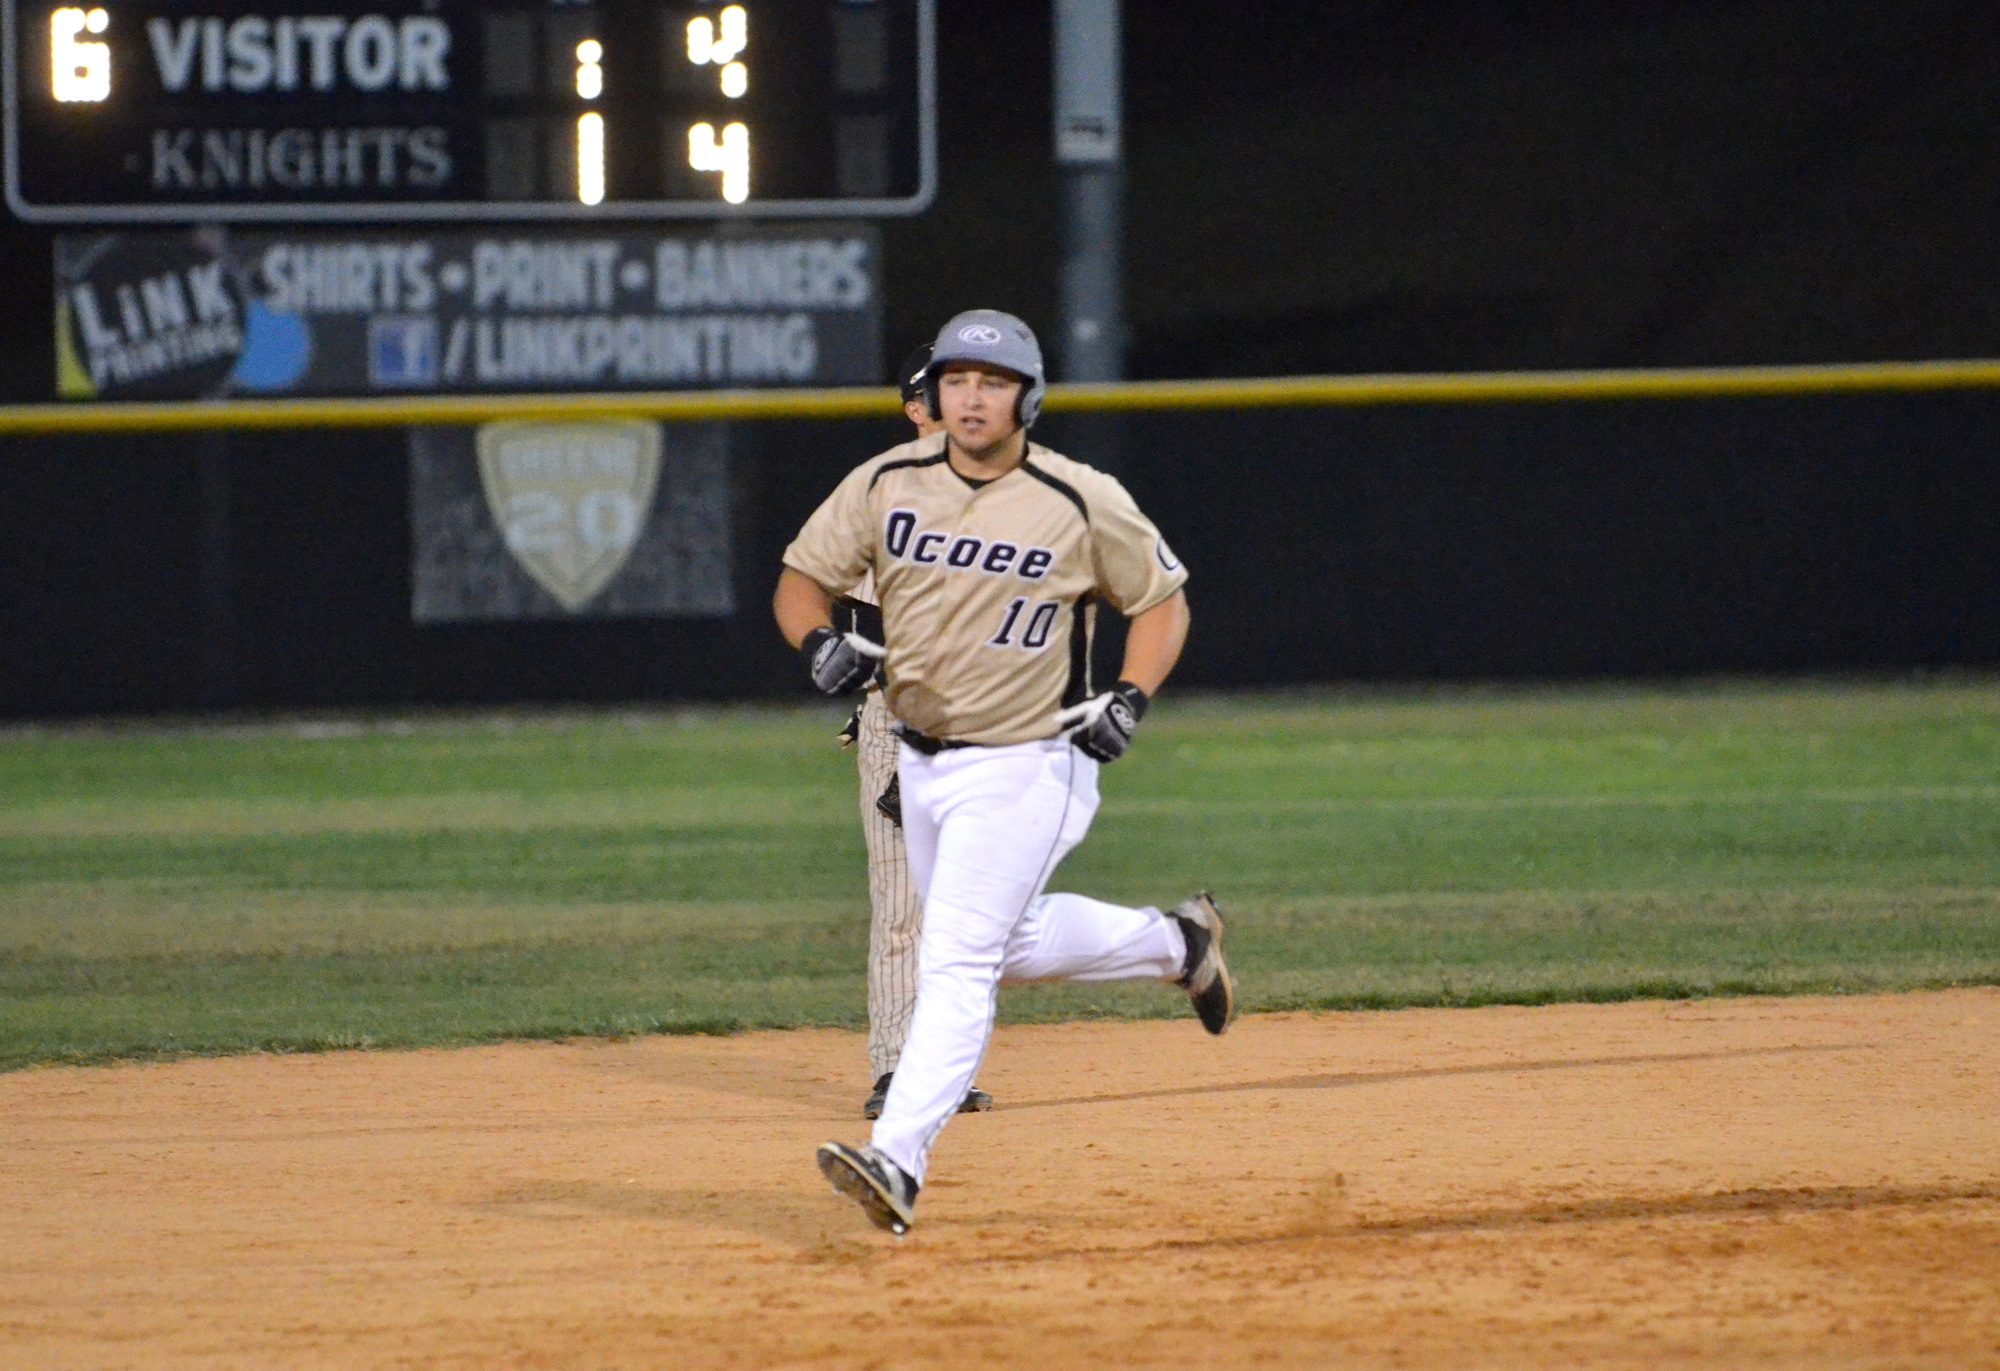 Bubba Sangster rounds second base after his crucial home run in the top of the sixth inning.